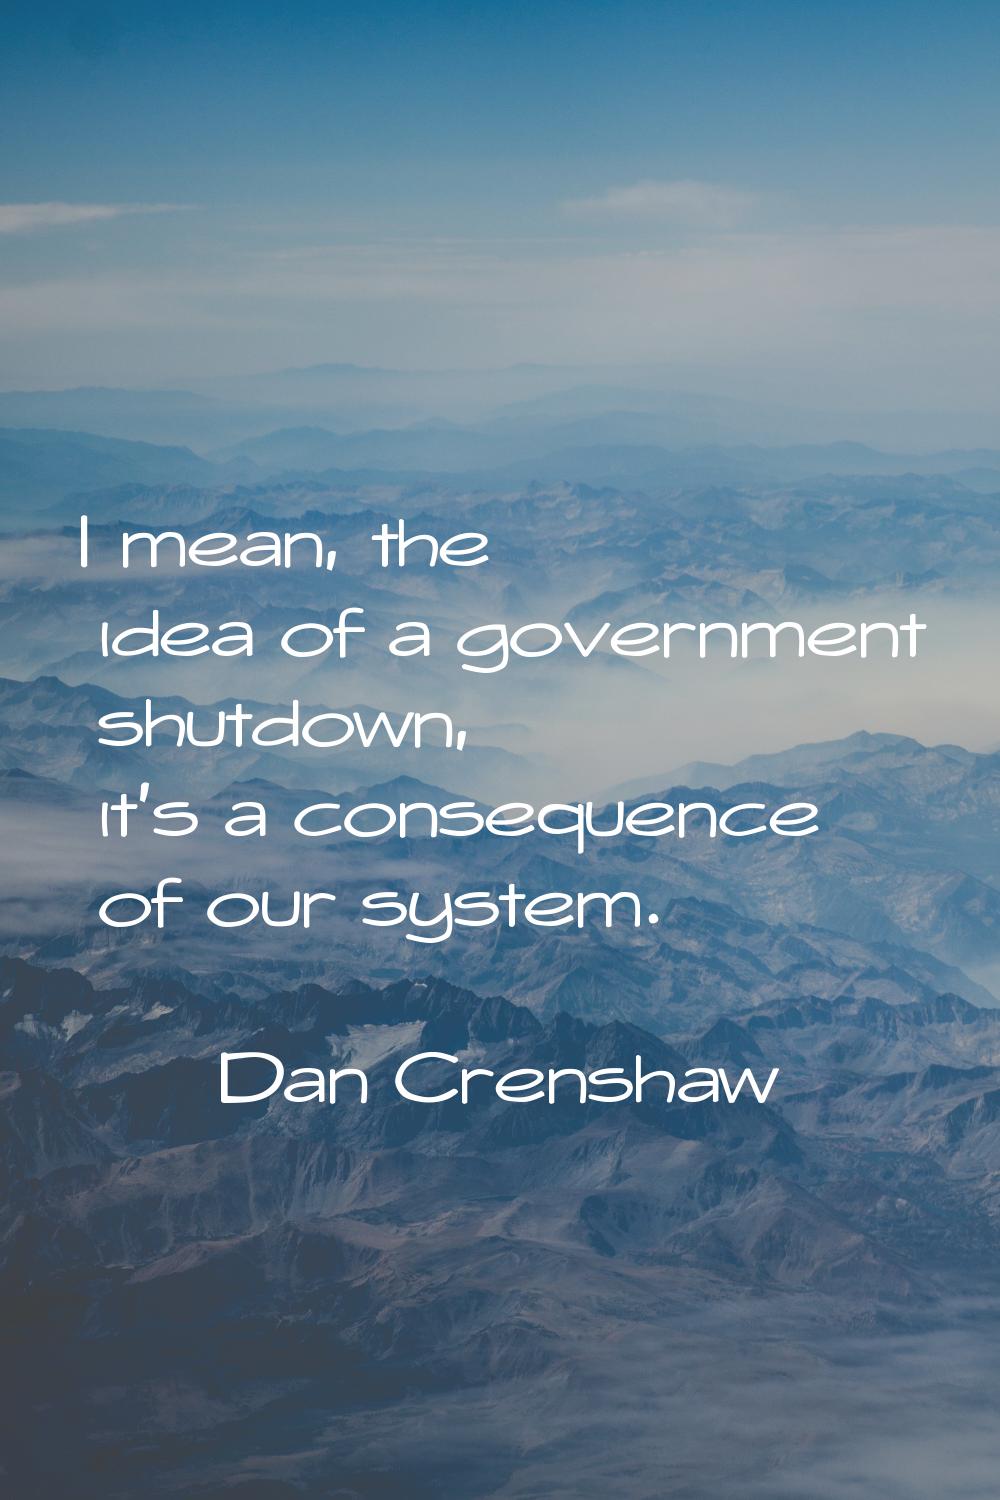 I mean, the idea of a government shutdown, it's a consequence of our system.